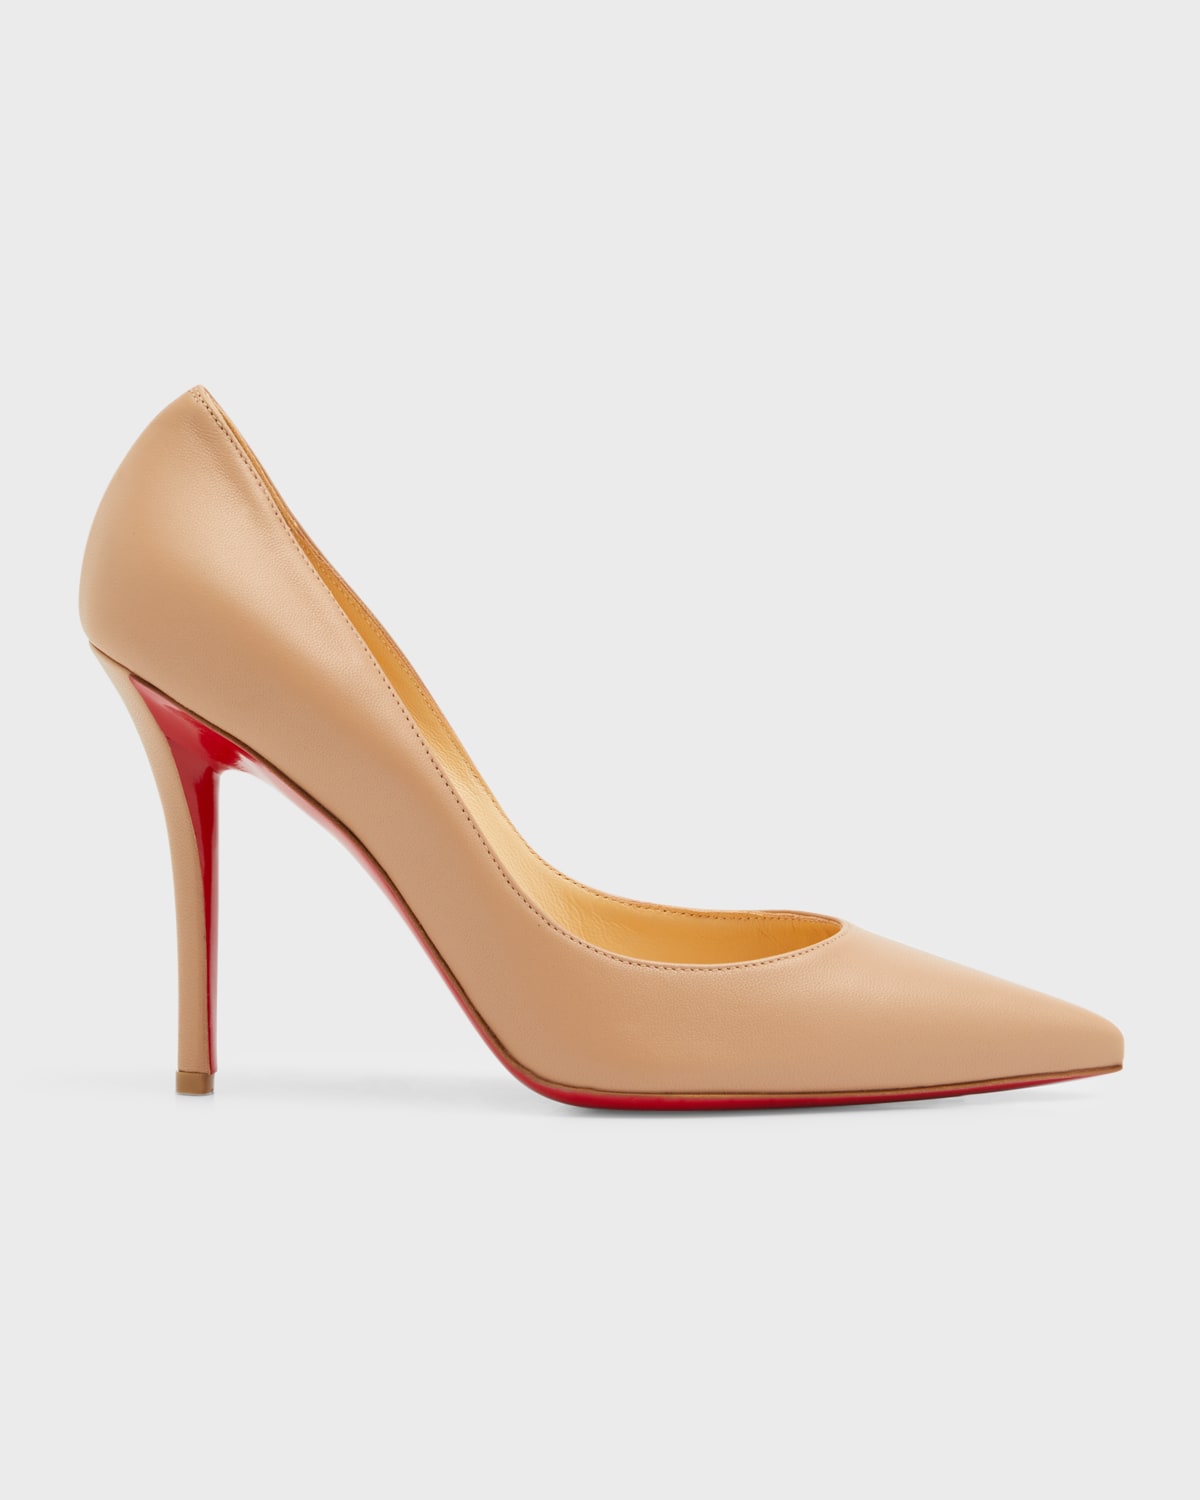 Apostrophy Leather Pointed Red-Sole Pumps